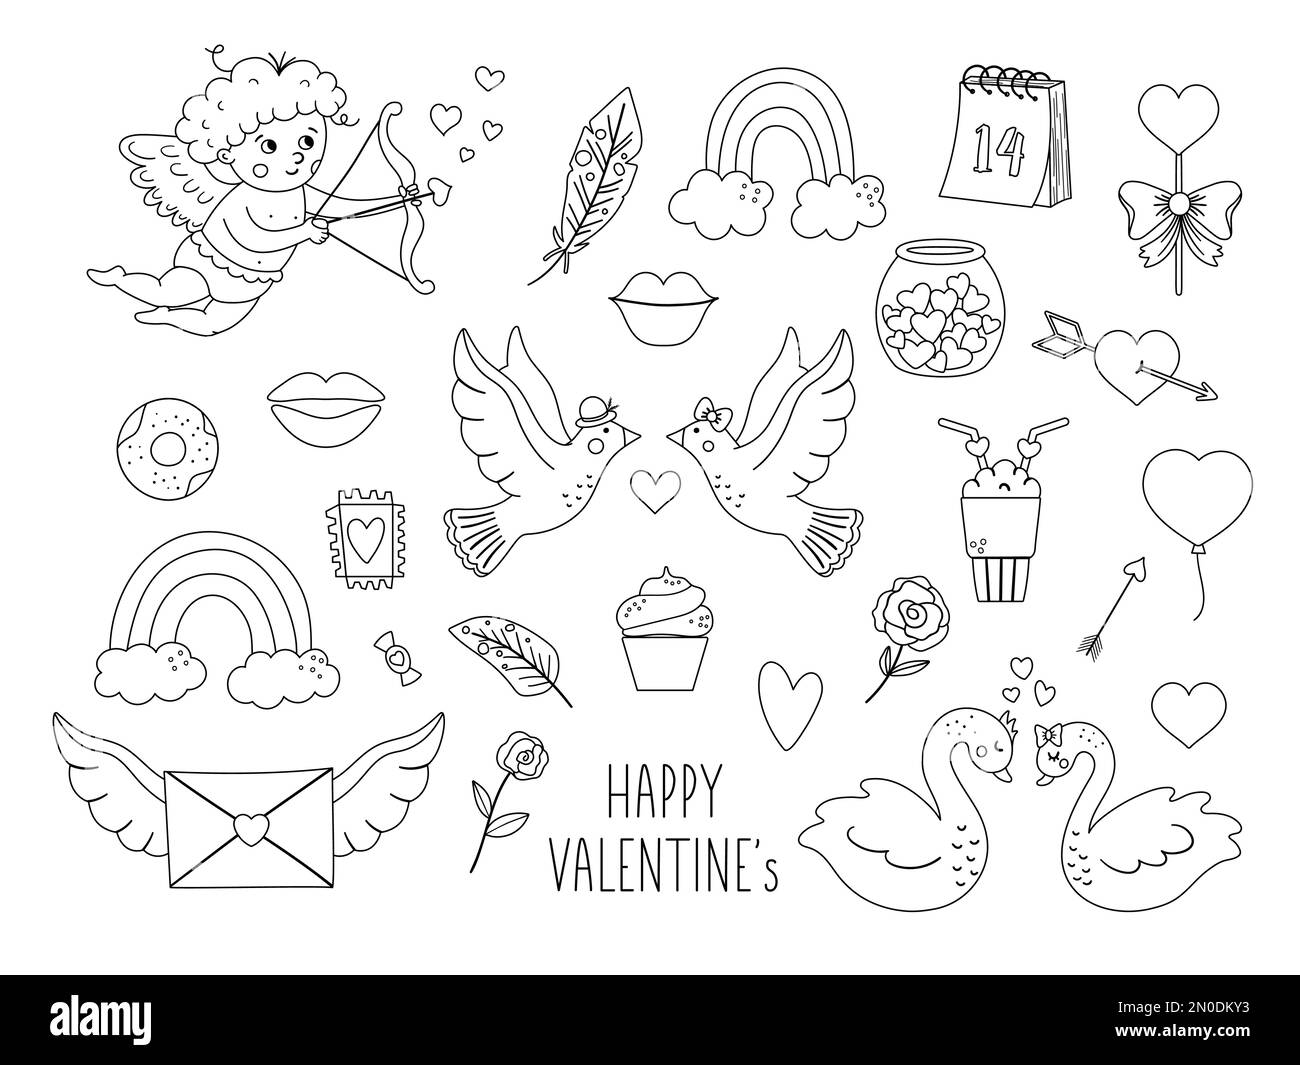 Valentines day symbols Stock Vector Images - Page 3 - Alamy